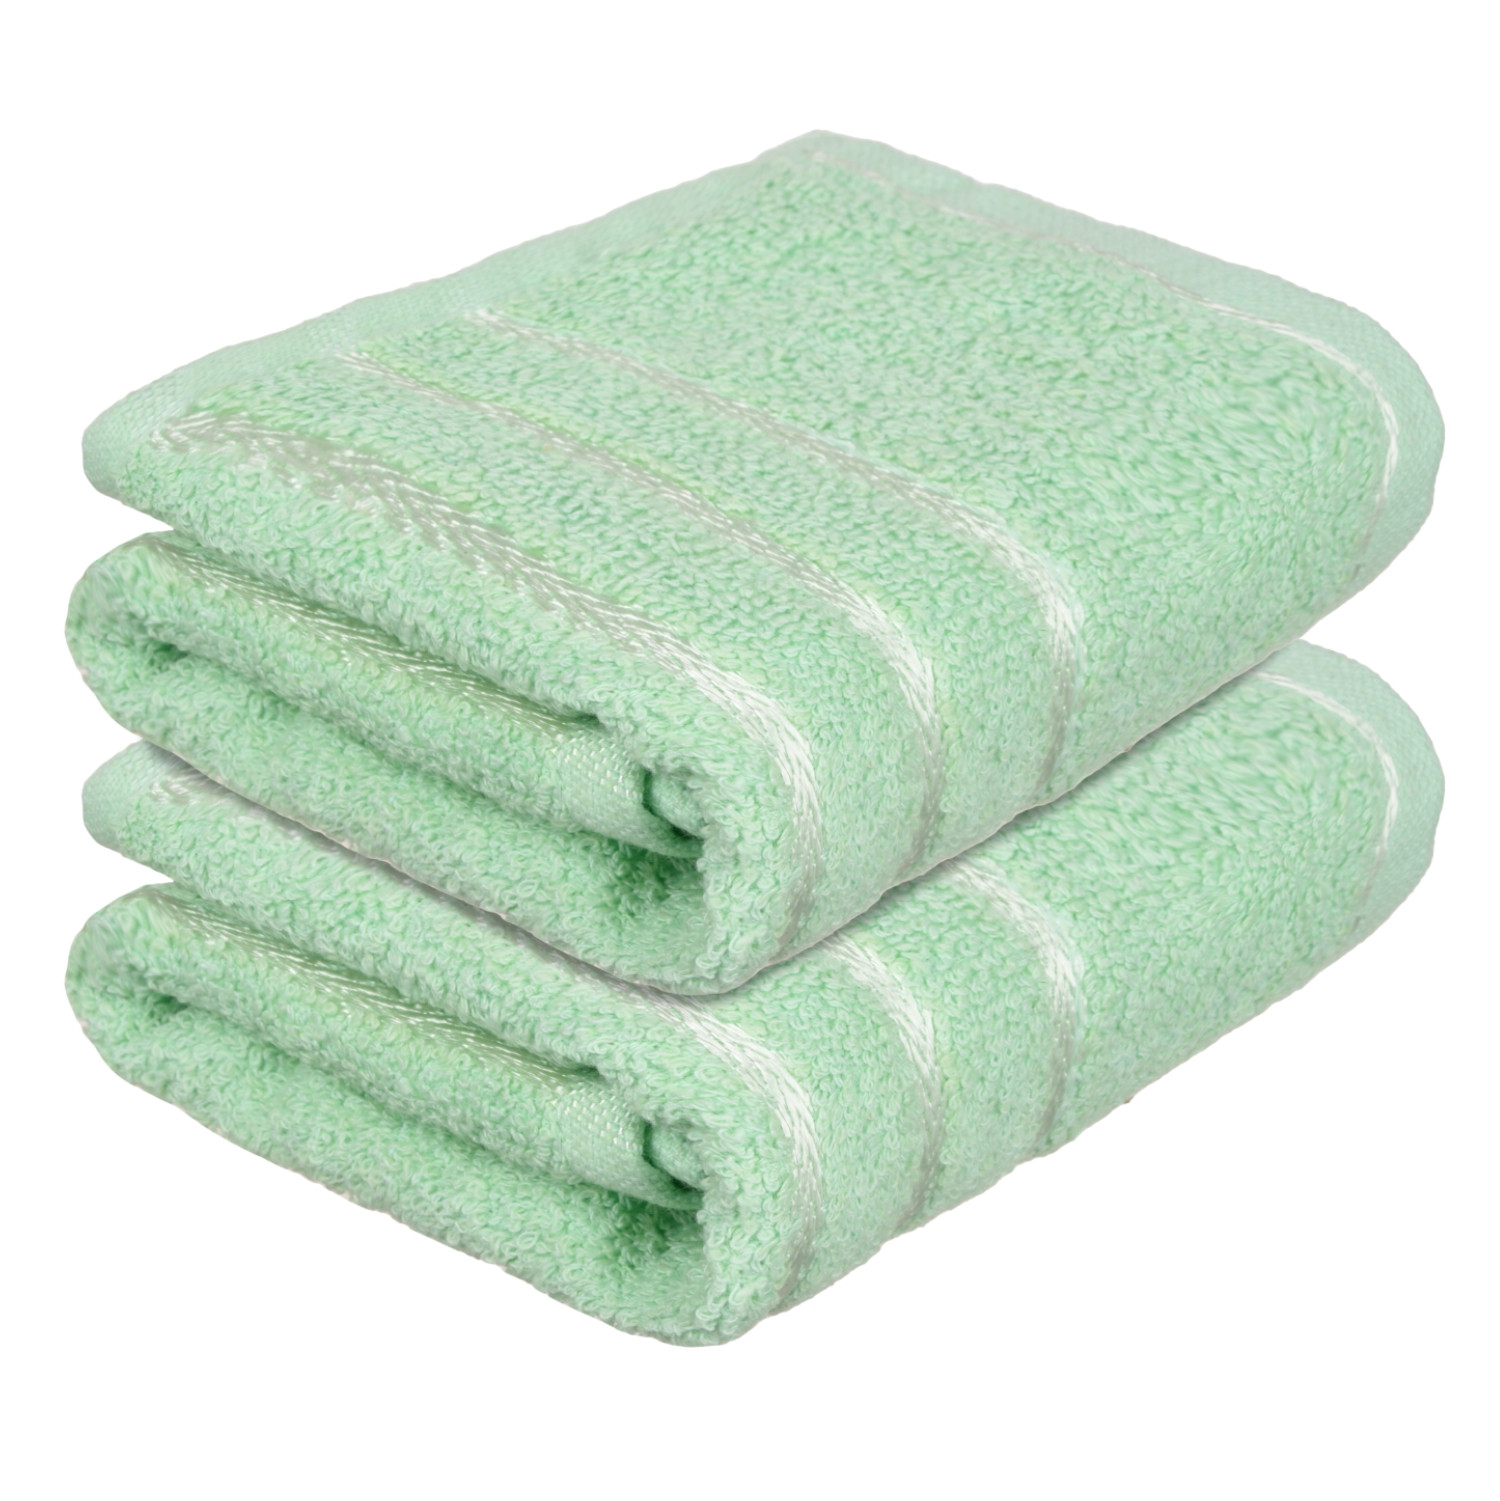 Kuber Industries Face Towel | Towels for Facewash | Towels for Gym | Facewash for Travel | Towels for Daily use | Workout Hand Towel | Lining Design | 14x21 Inch|Green